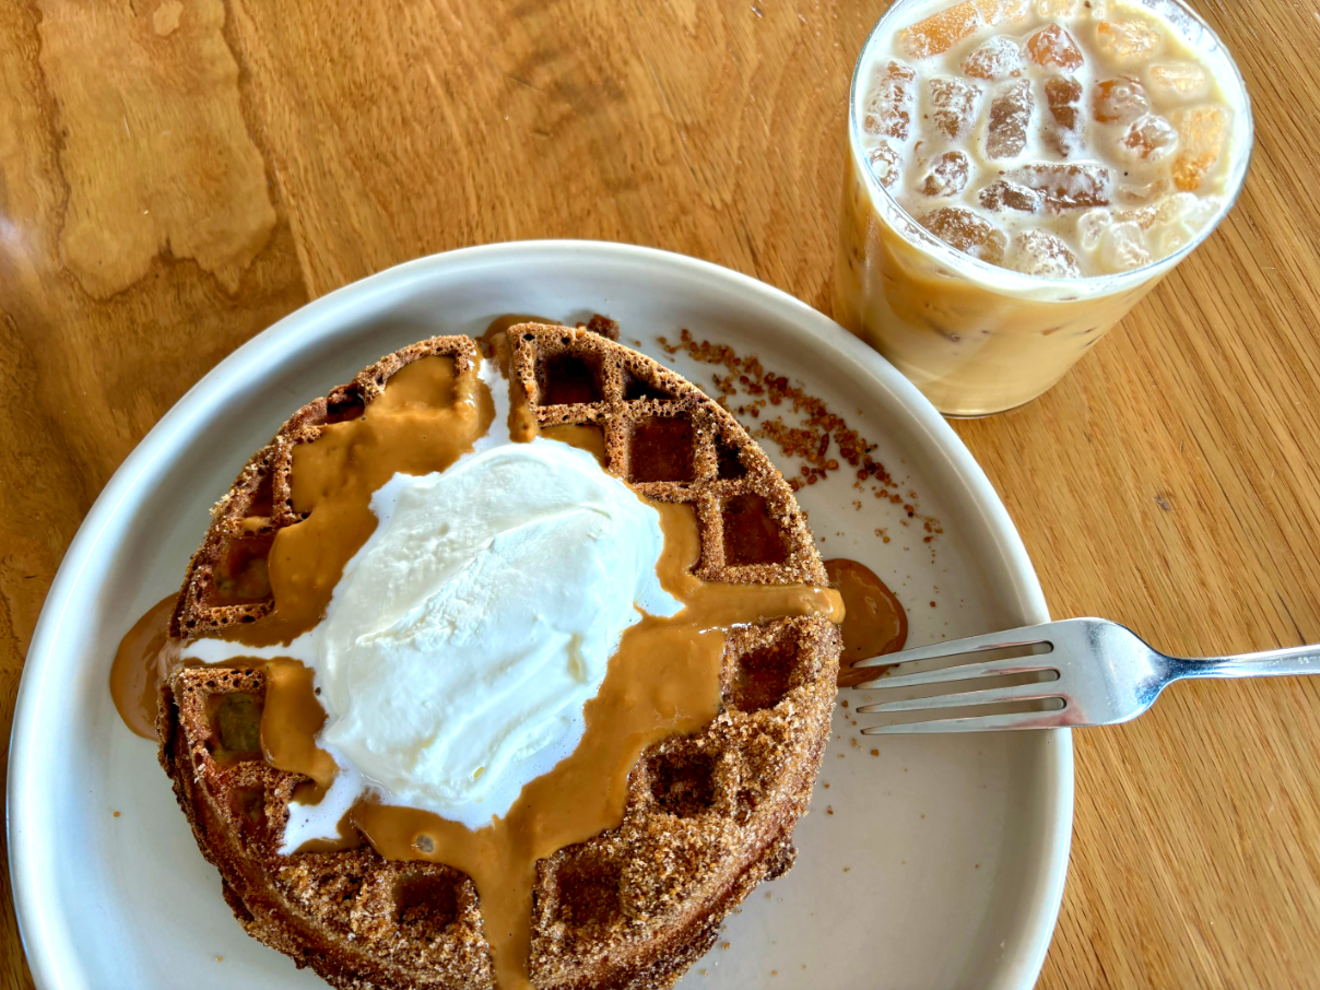 After stopping by for a coffee, we couldn't resist the churro waffle at Valentine. It ended up being one of the best things we ate all month.